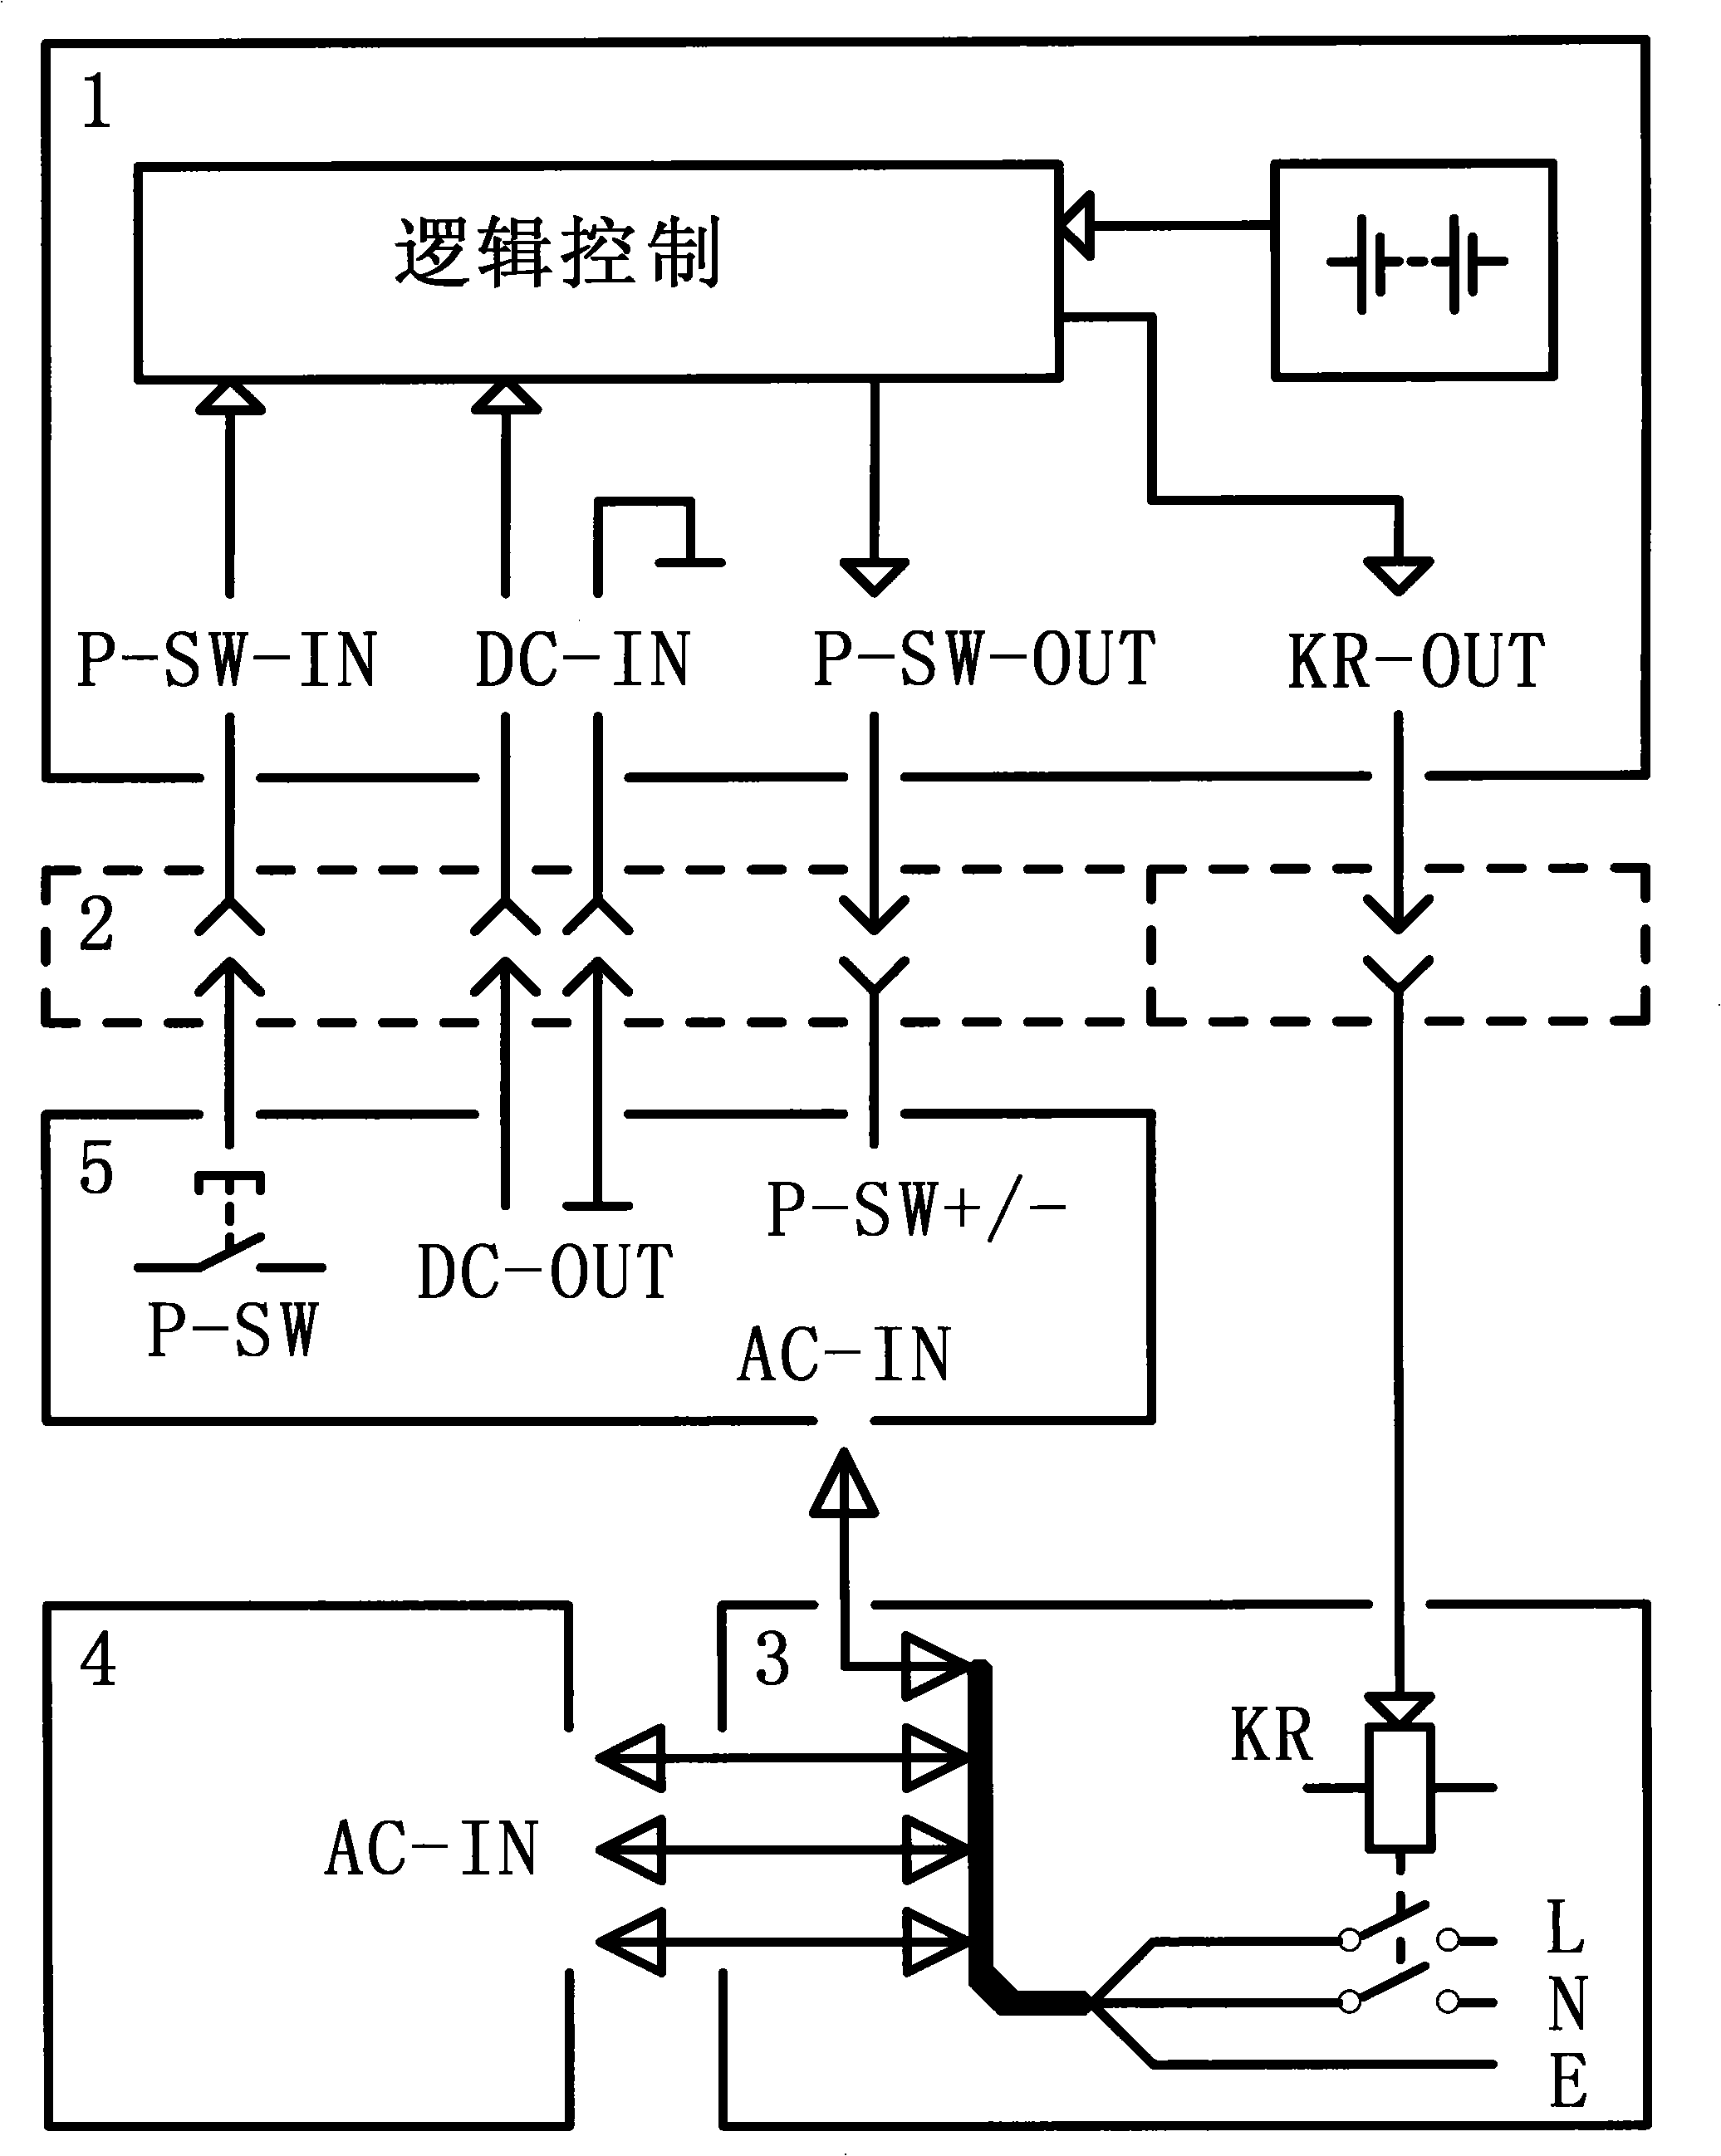 Computer system AC power supply control device using host computer power supply switch and battery